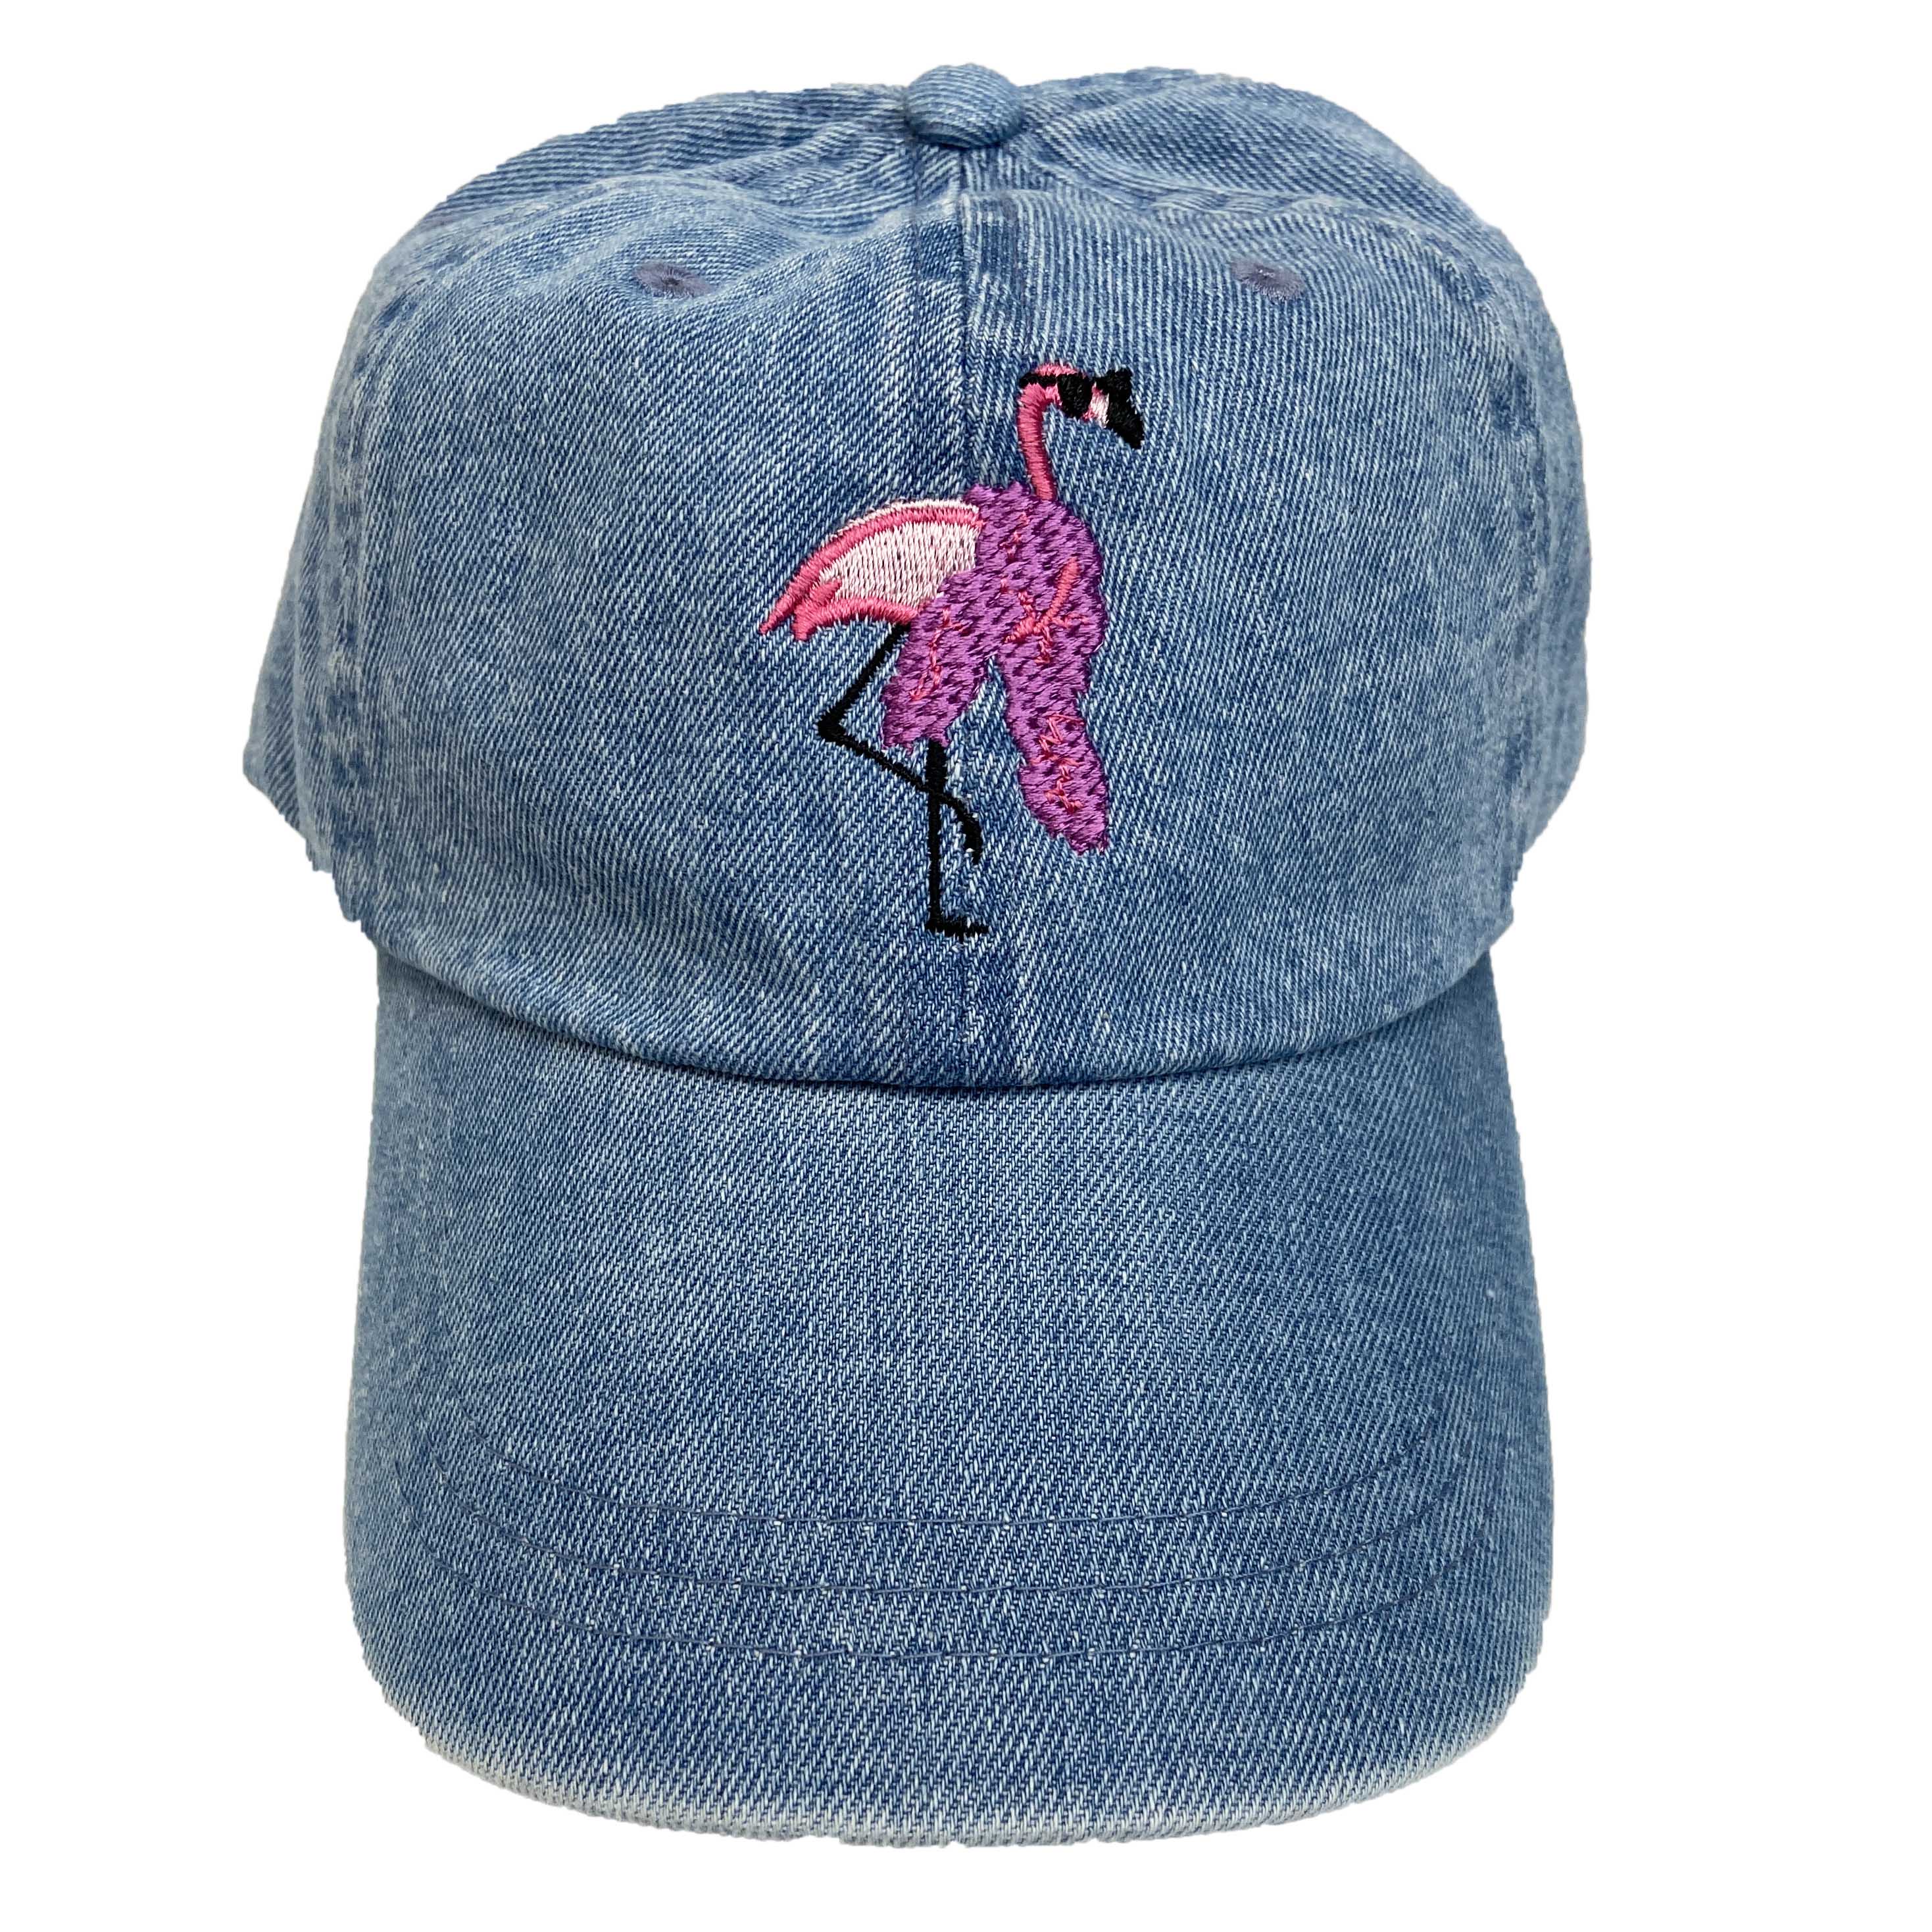 Flamingo with Feather Boa (Denim) / Baseball Hat - Route One Apparel